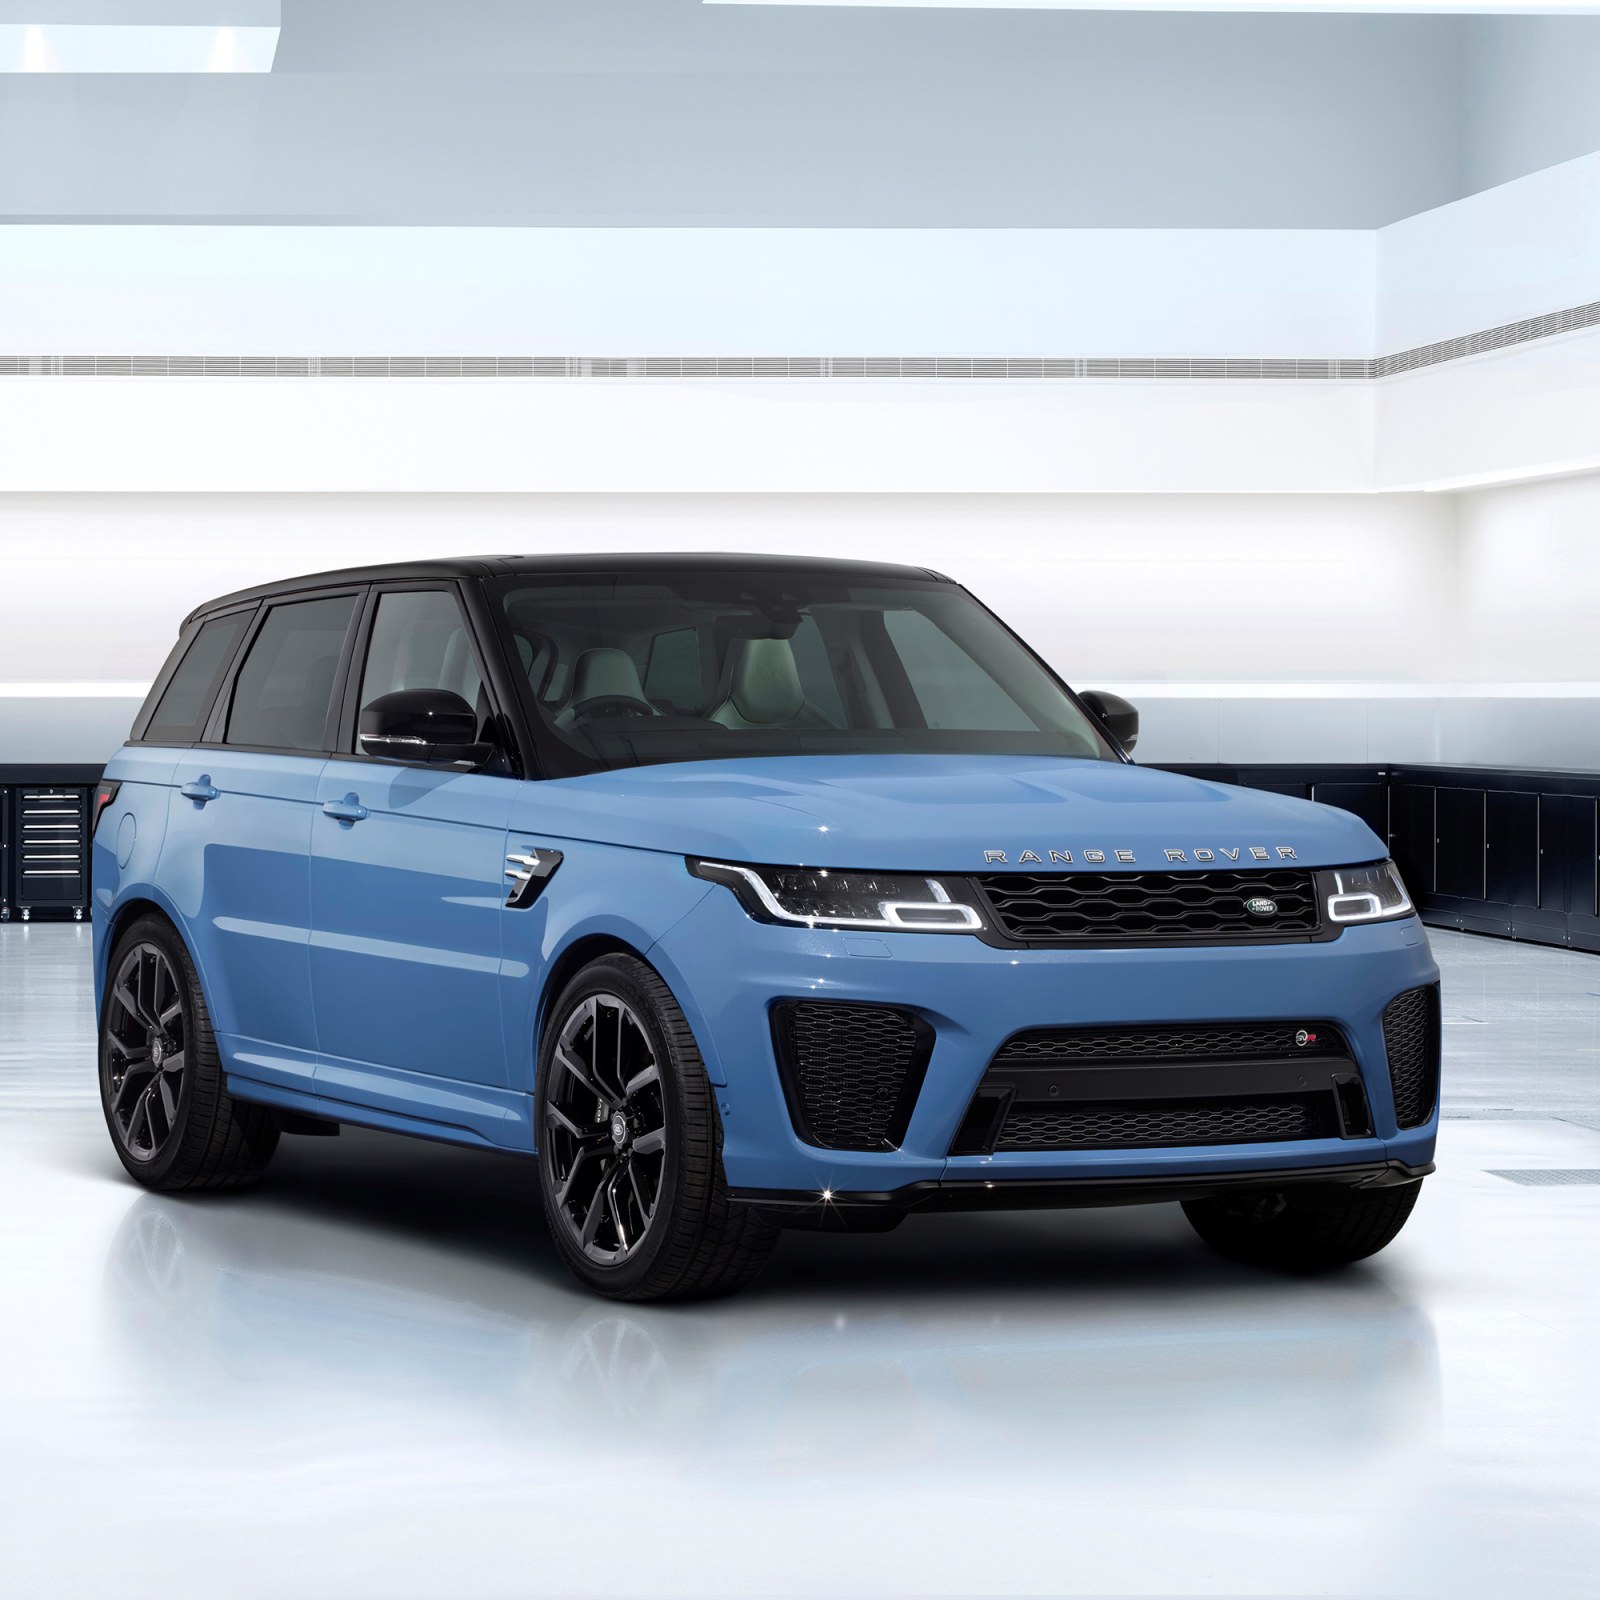 Range Rover Sport SVR is the Fastest, Most Powerful Land Rover Sells